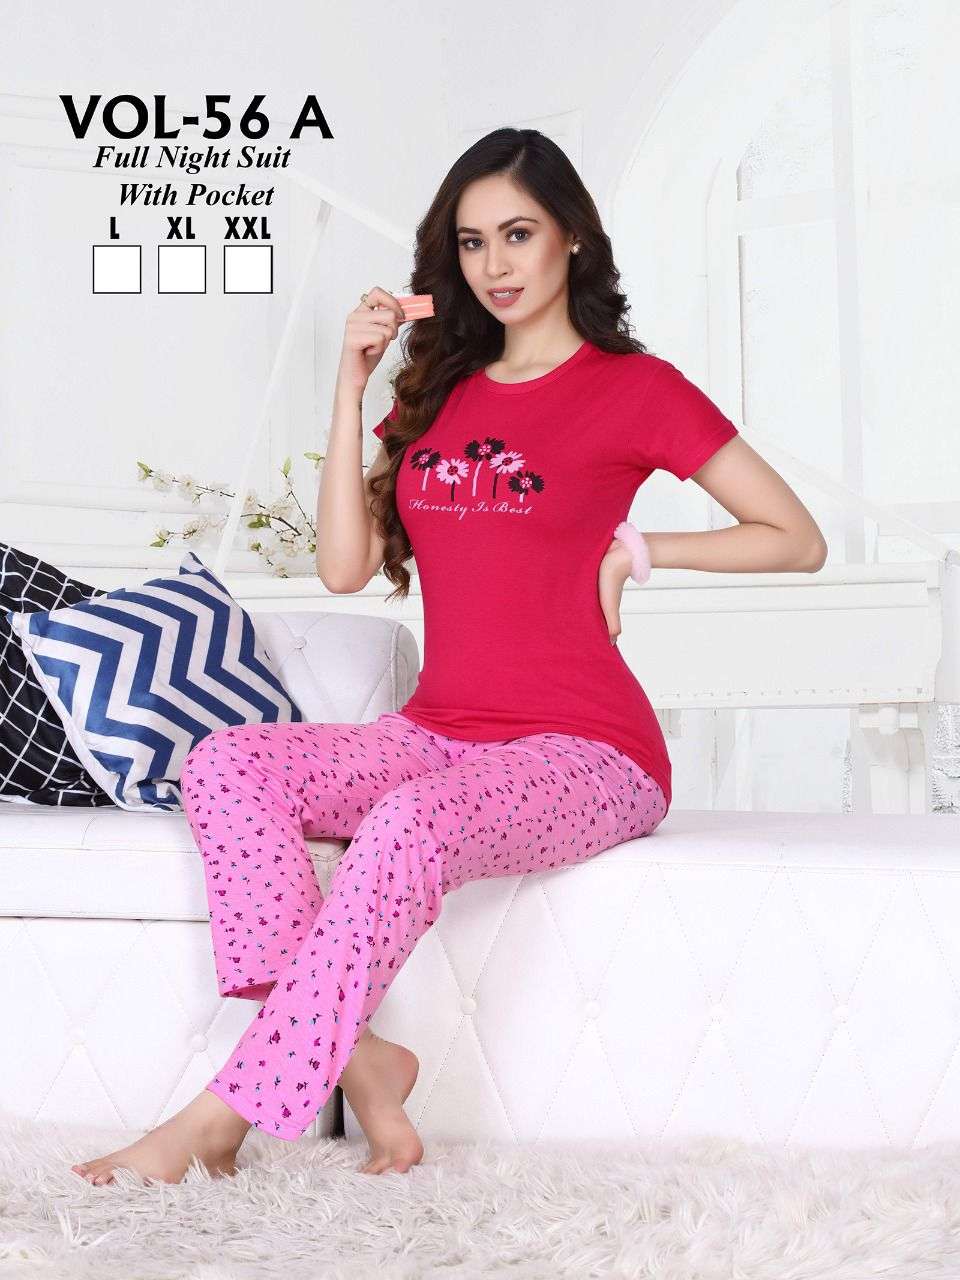 TRENDY VOL.56 A Heavy Shinker Hosiery Cotton Night Suits With Pocket CATALOG WHOESALER BEST RATE